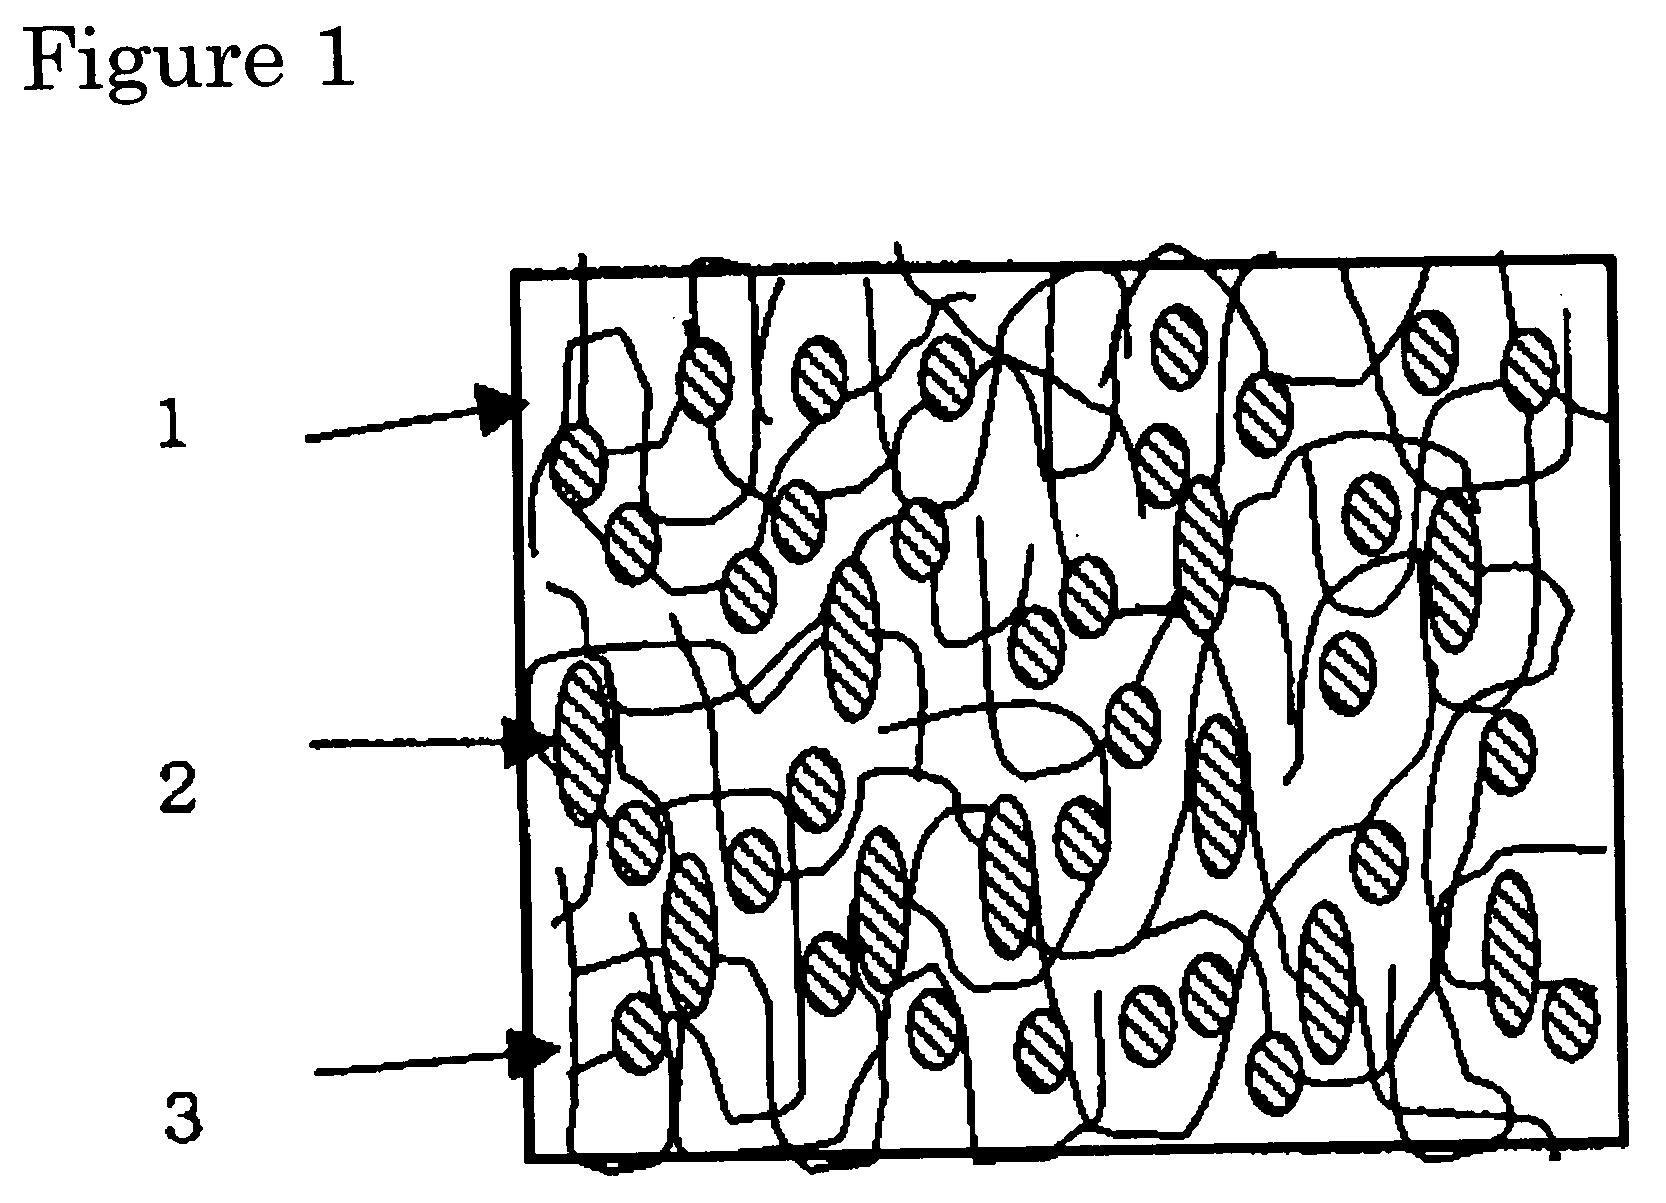 Conductive cushion material and process for producing the same